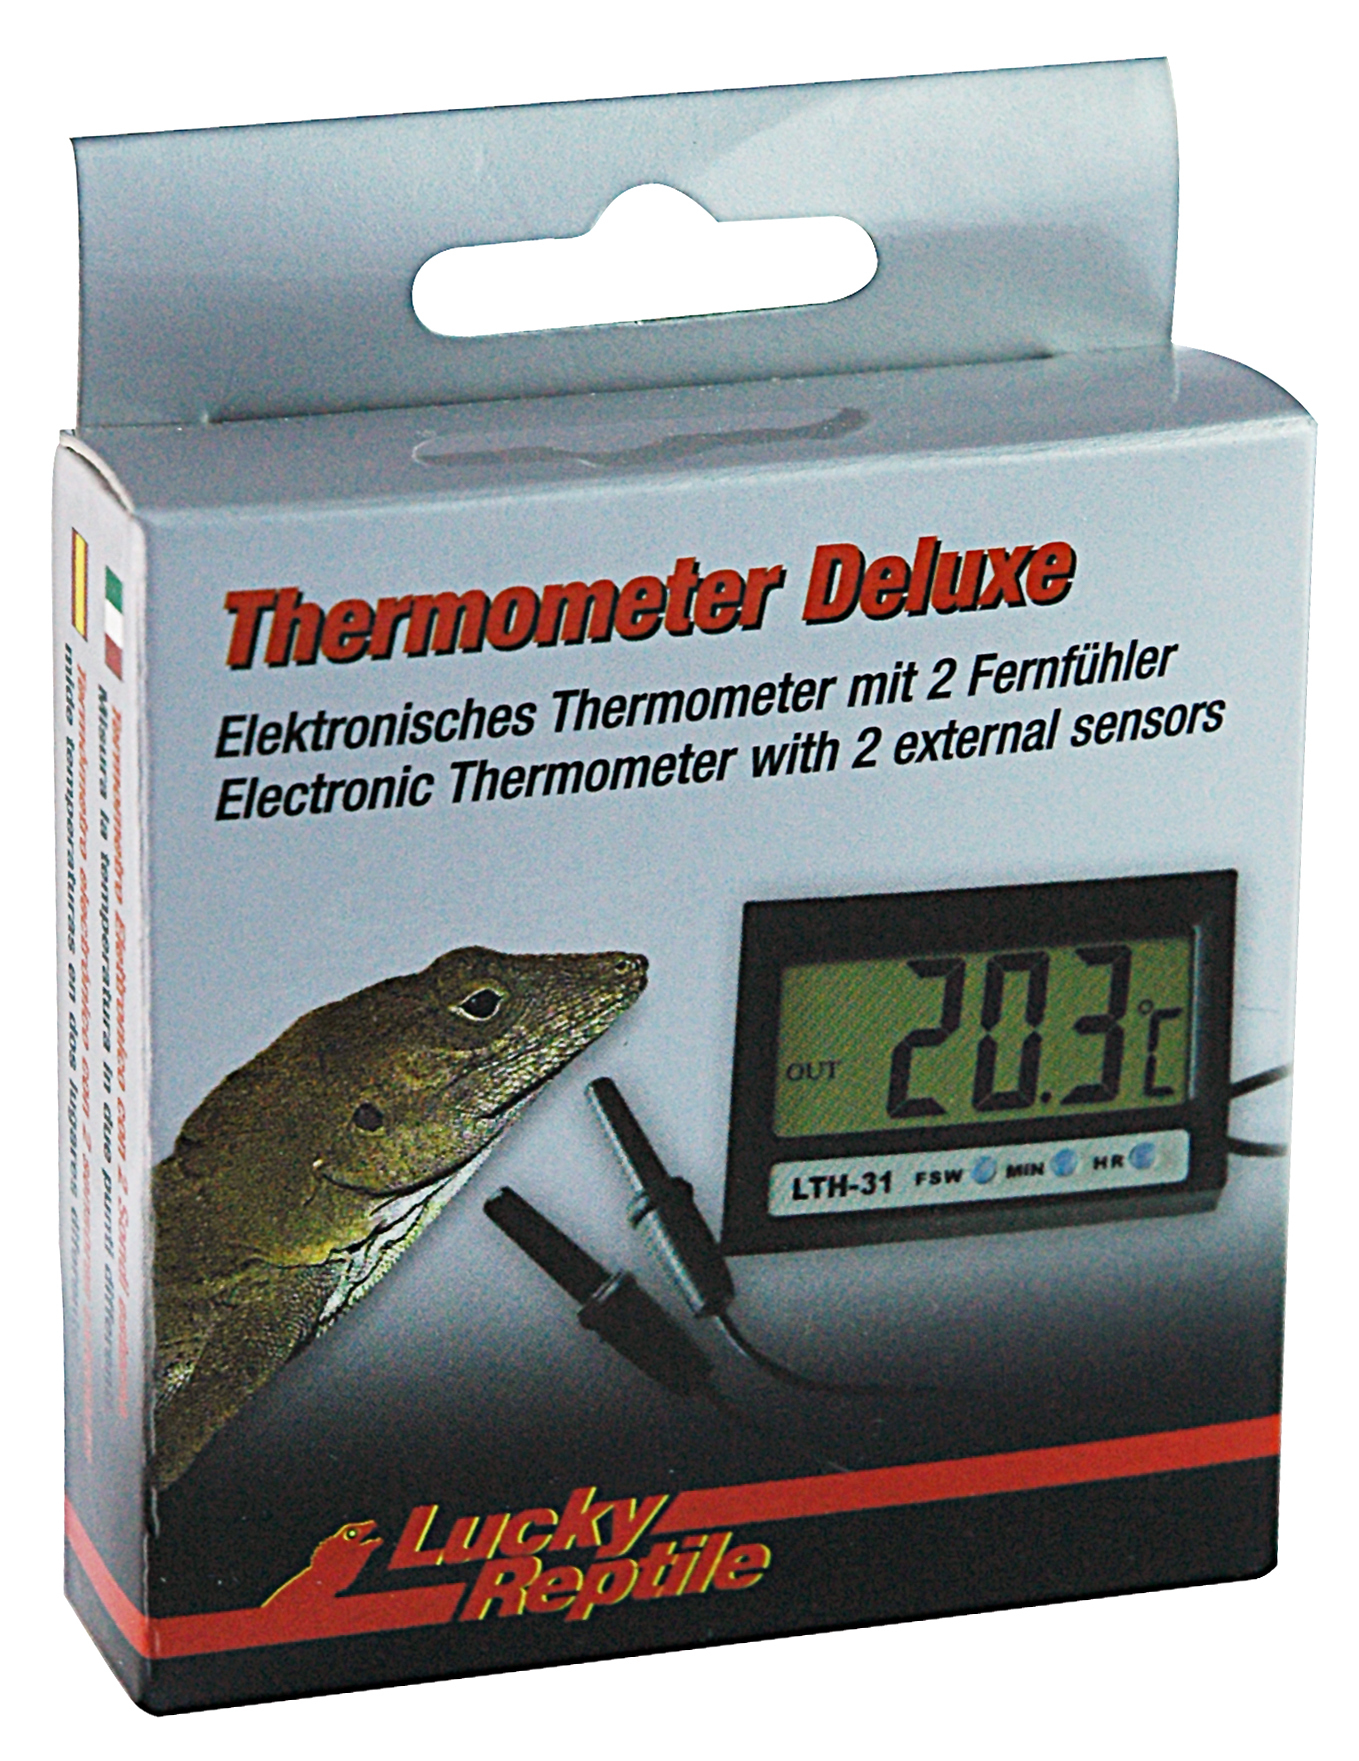 Import-Export Peter Hoch GmbH Thermometer Deluxe